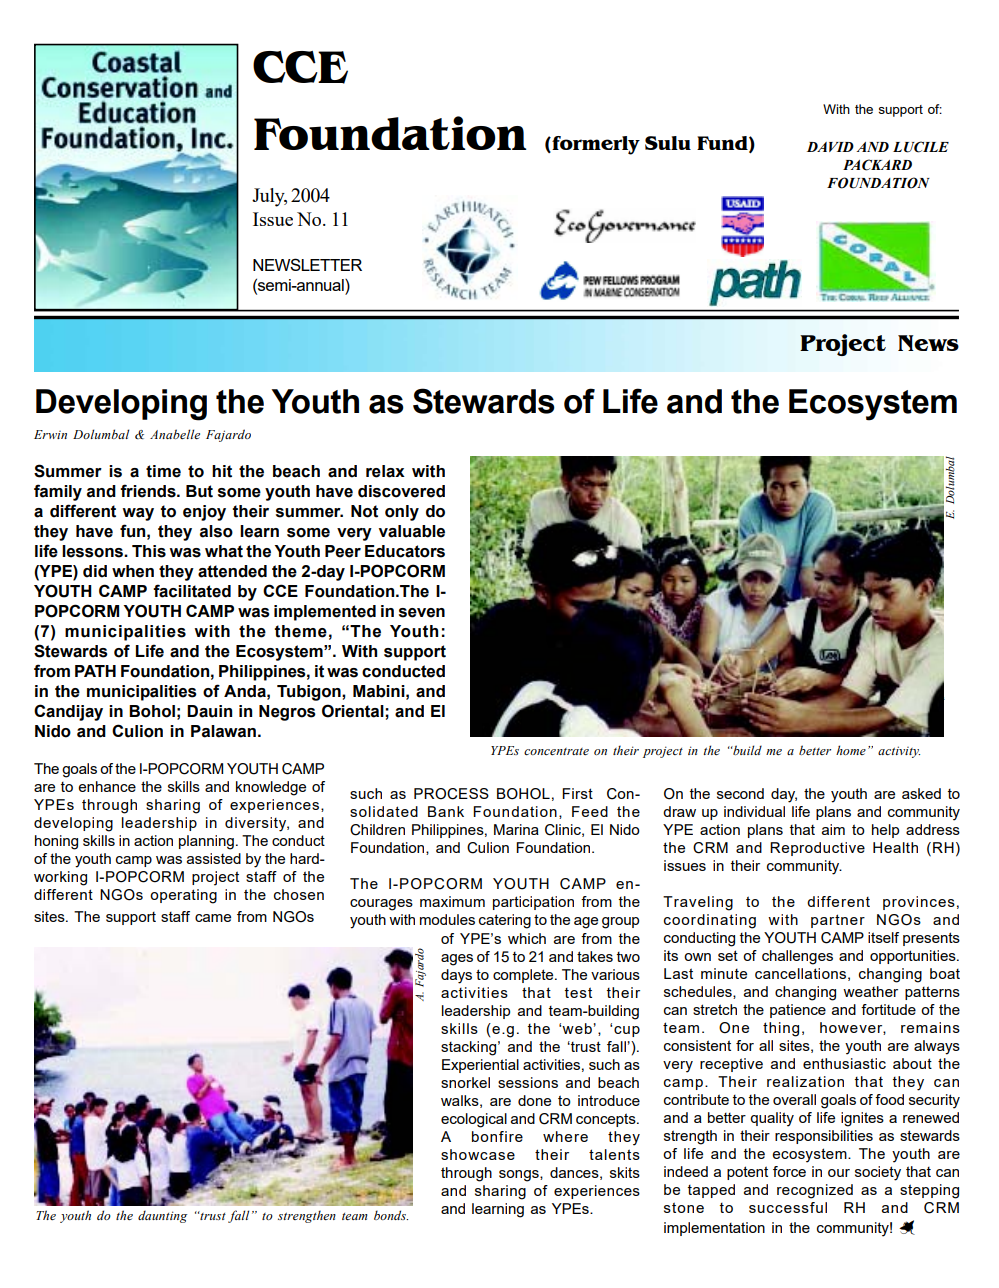 DEVELOPING THE YOUTH AS STEWARDS OF LIFE AND THE ECOSYSTEM